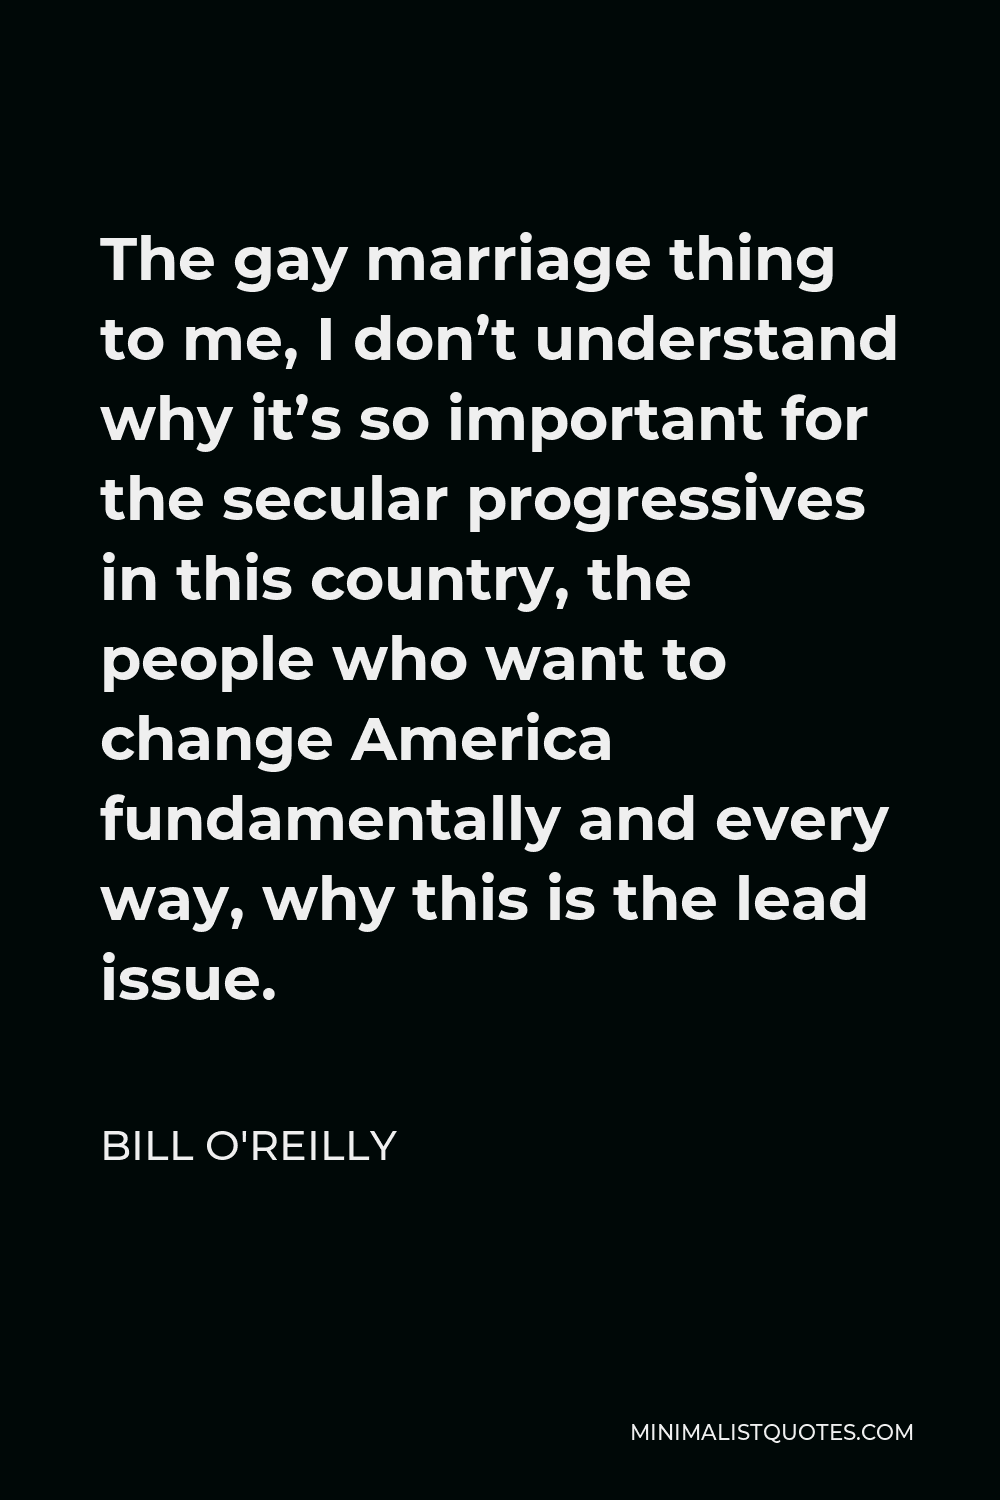 Bill O'Reilly Quote - The gay marriage thing to me, I don’t understand why it’s so important for the secular progressives in this country, the people who want to change America fundamentally and every way, why this is the lead issue.